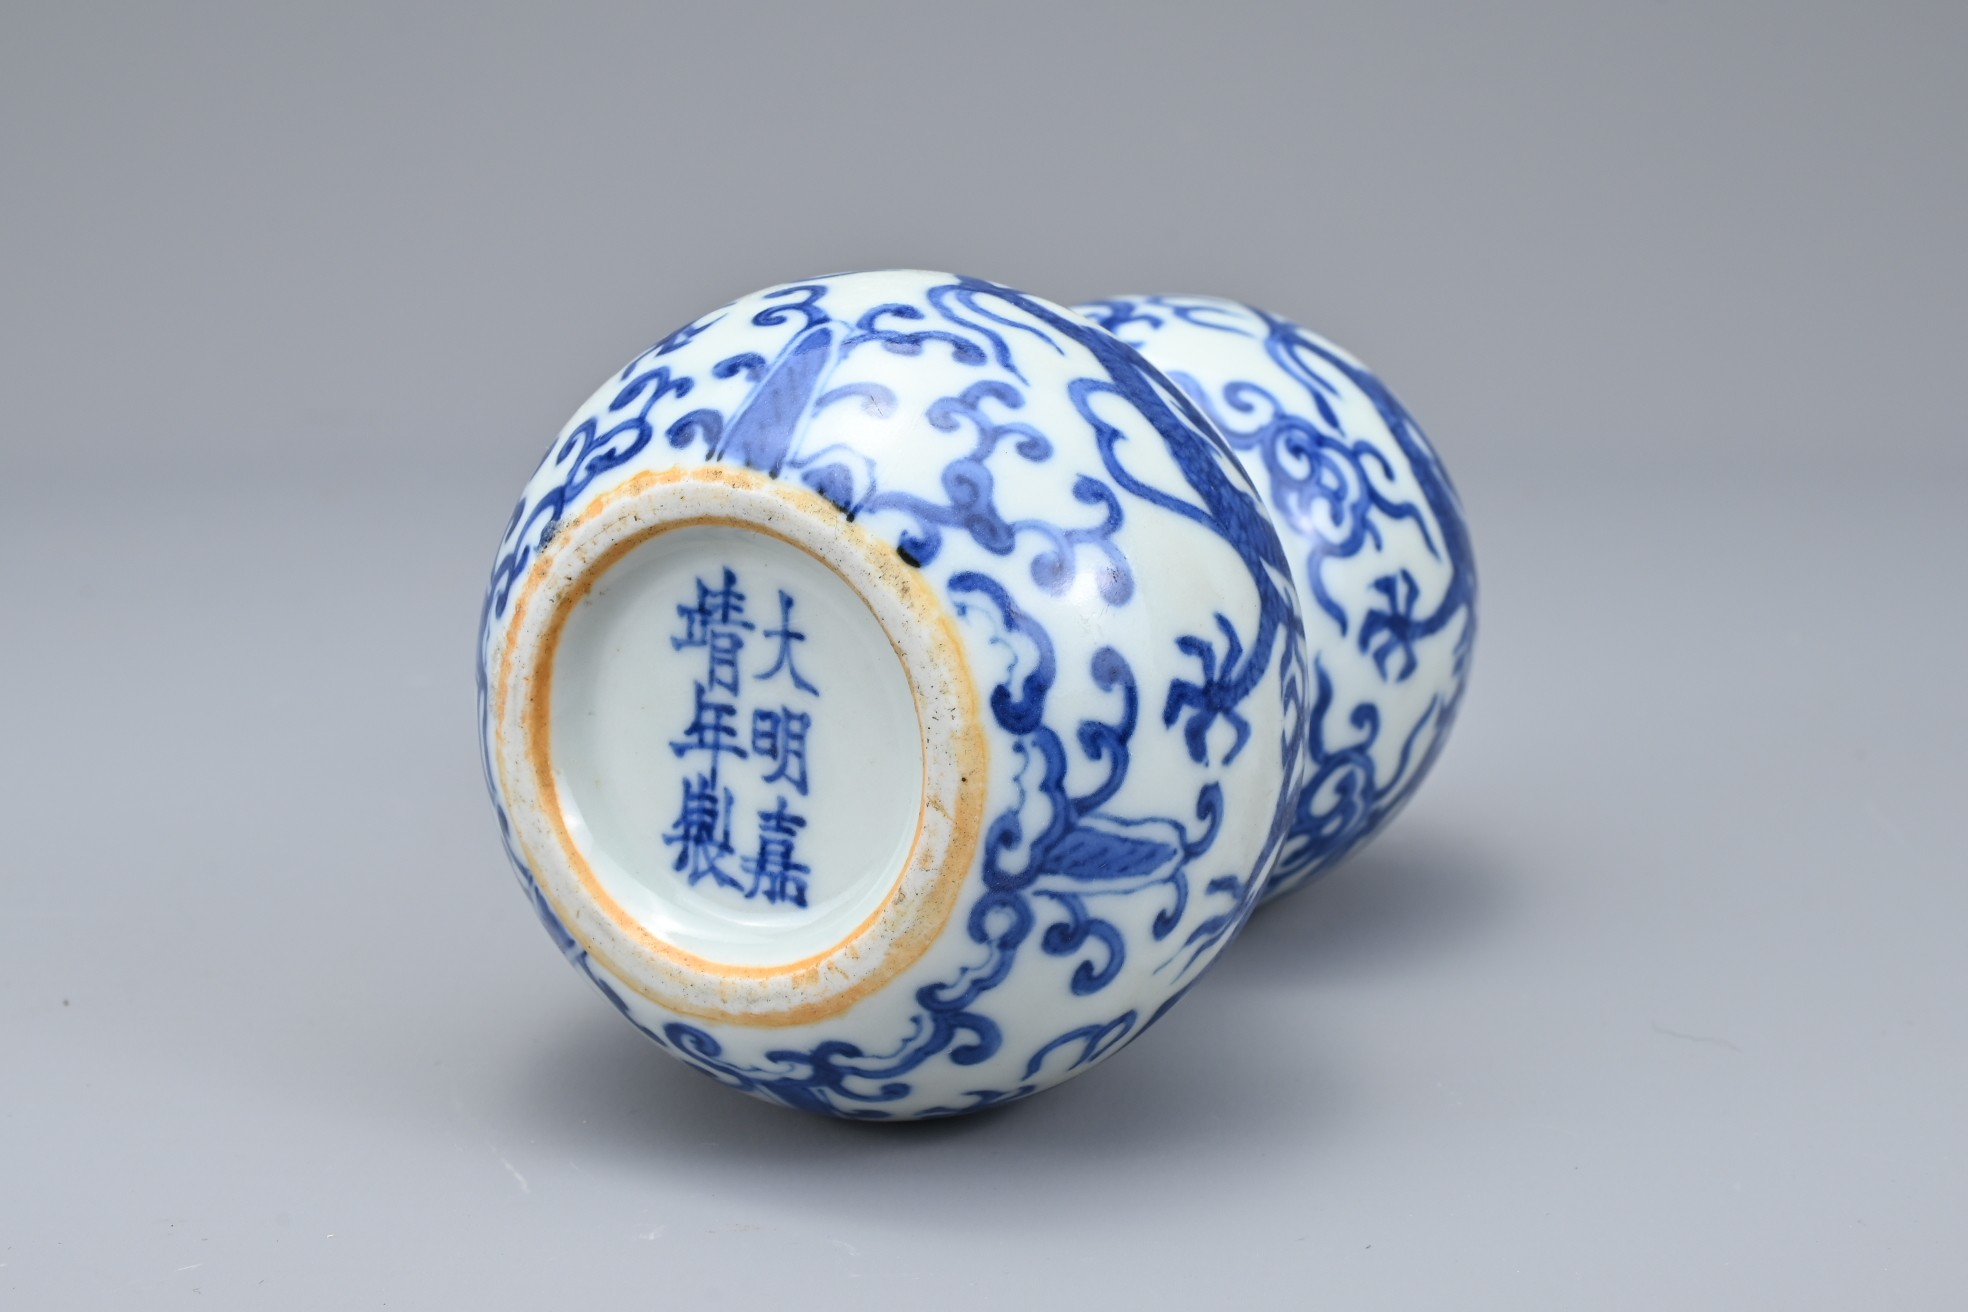 A CHINESE BLUE AND WHITE PORCELAIN DOUBLE-GOURD DRAGON VASE, MARK AND PERIOD OF JIAJING (1522-1566) - Image 7 of 9